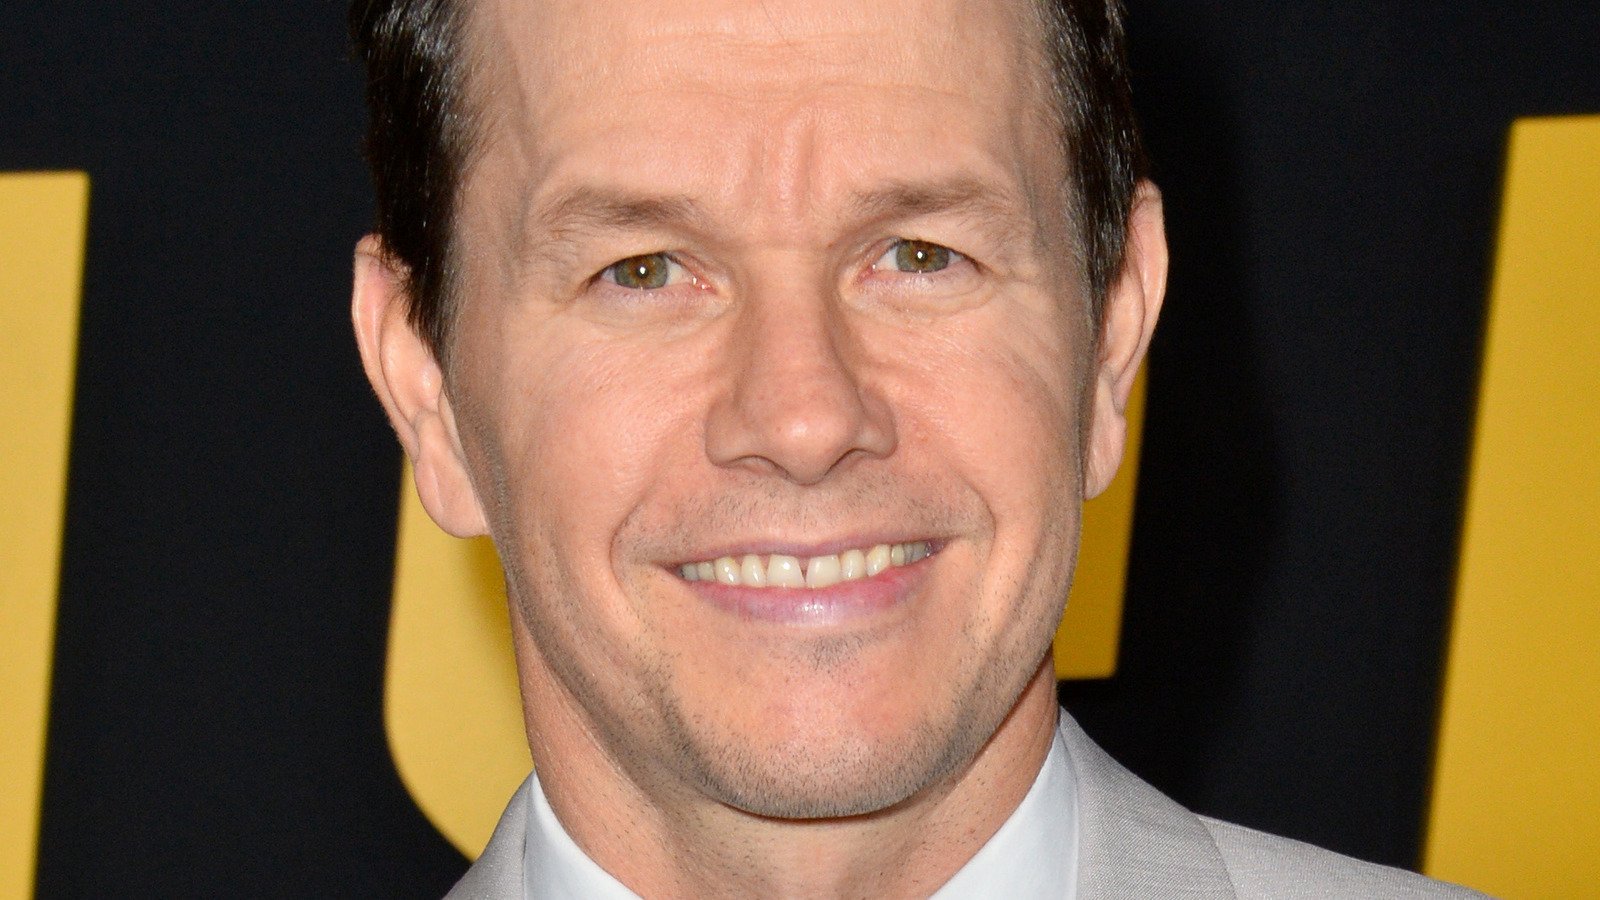 This Is Mark Wahlberg's Best Role, According To 21% Of Fans We Polled